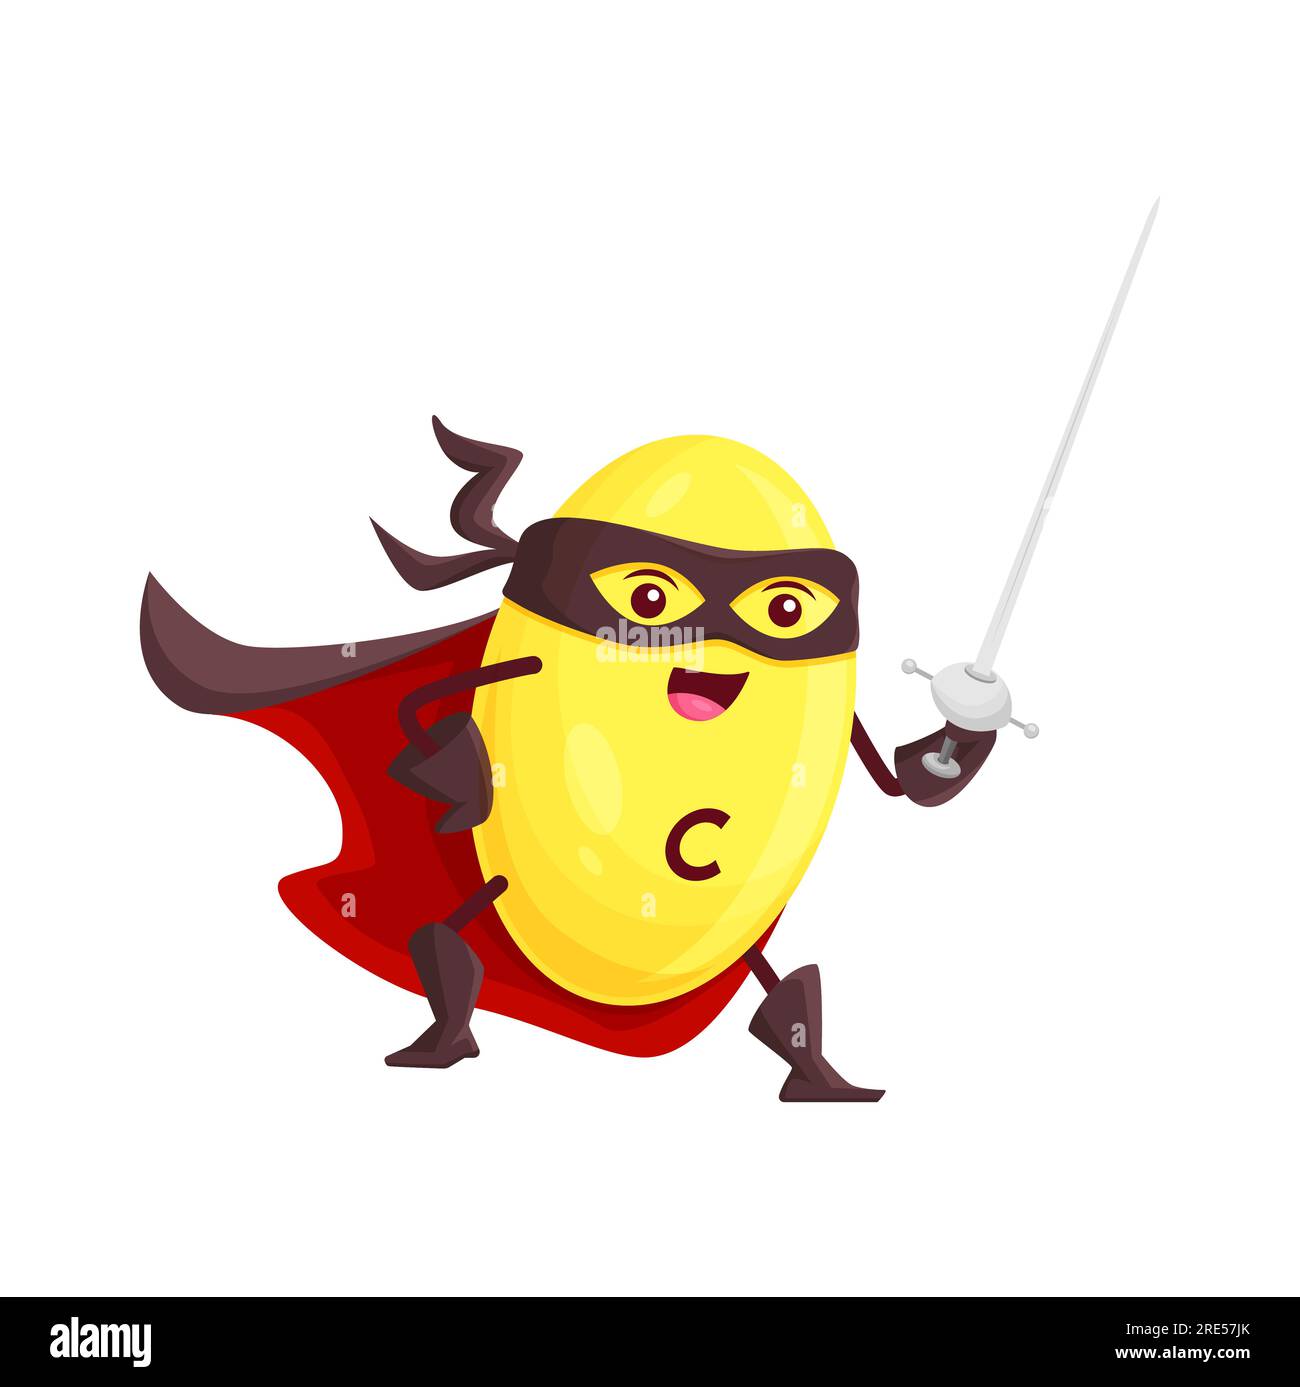 Lemon Hero, Superhero Character In Mask And Cape Holding A Shield, Comic,  Cartoon Style Vector Illustration Isolated On White Background. Lemon Fruit  Character In Superhero Mask And Cape With Shield. Royalty Free